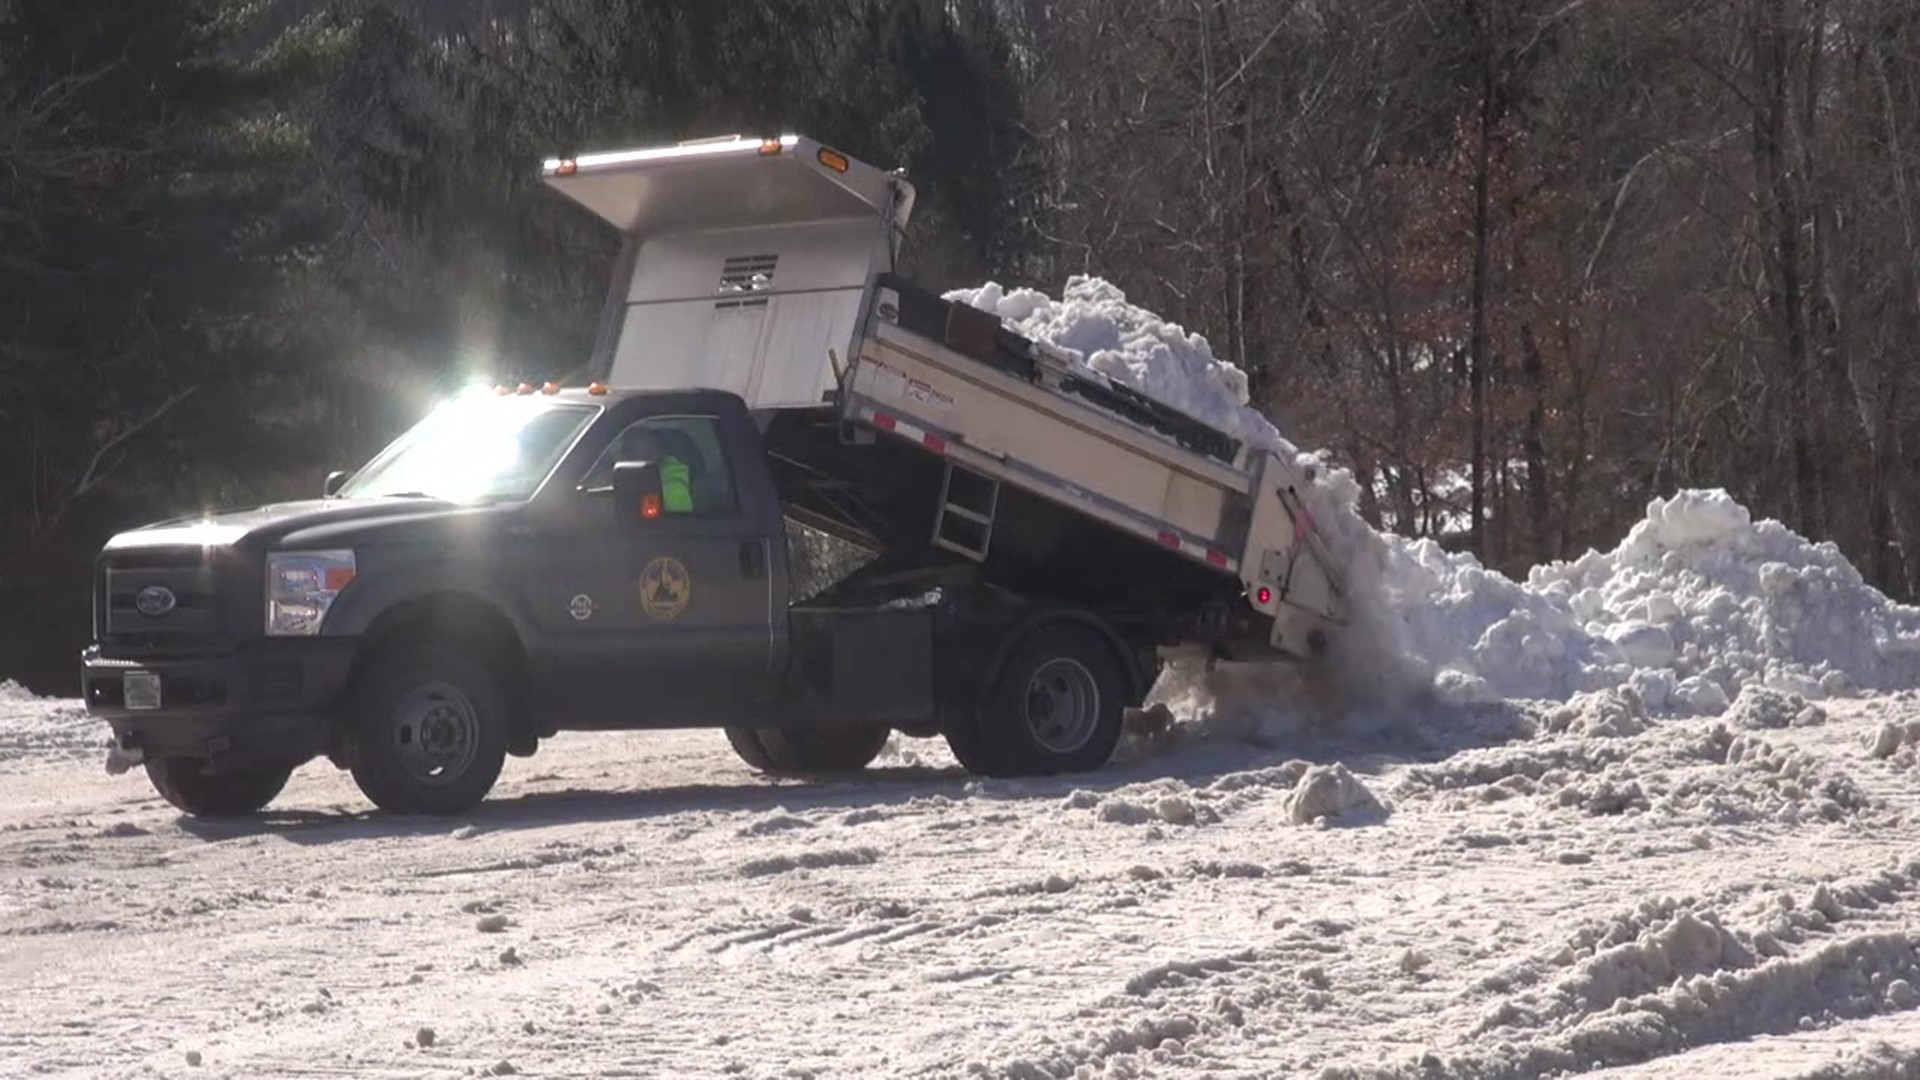 Workers say it's like the movie "Groundhog Day." Every day means the same thing: removing snow.